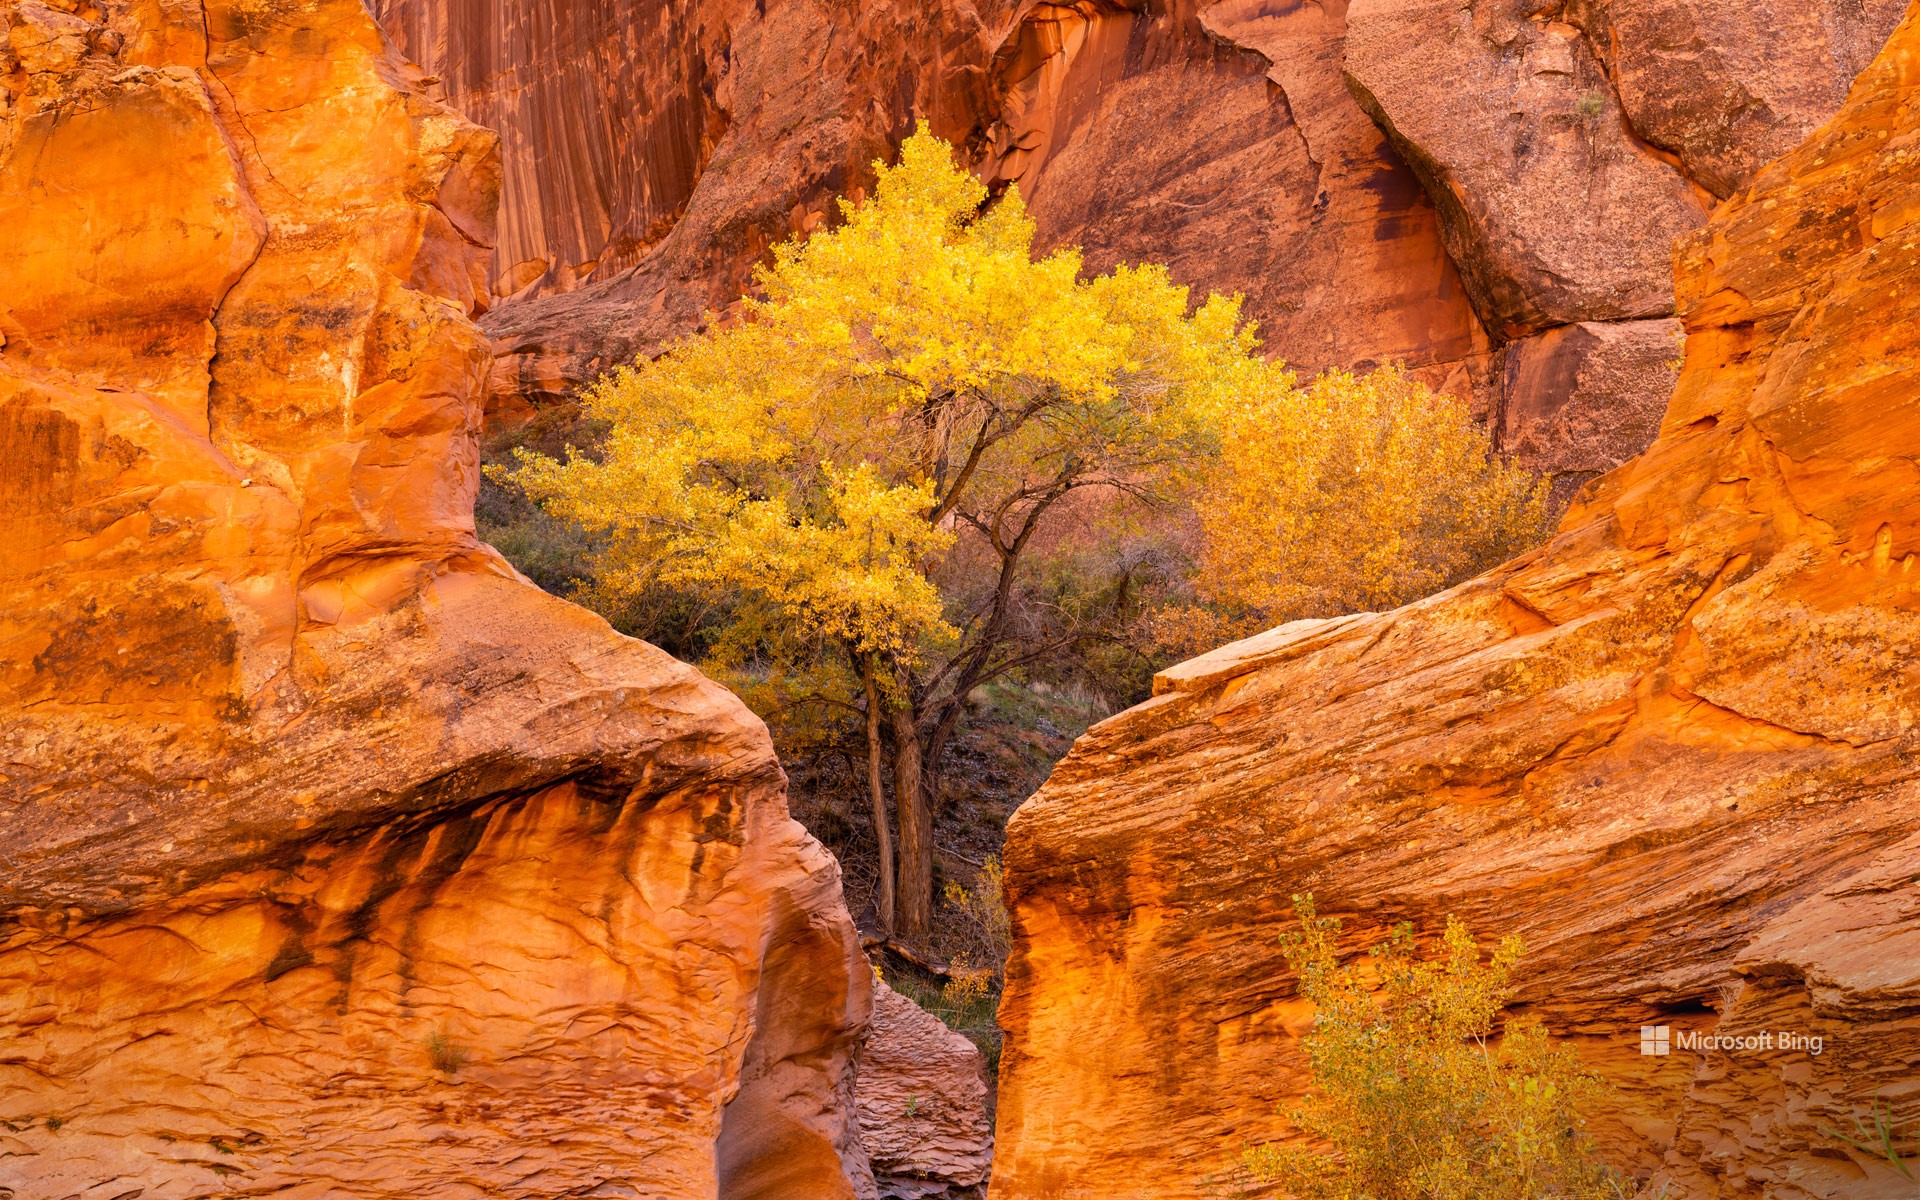 Cottonwood trees and red sandstone in Coyote Gulch, Glen Canyon National Recreation Area, Utah